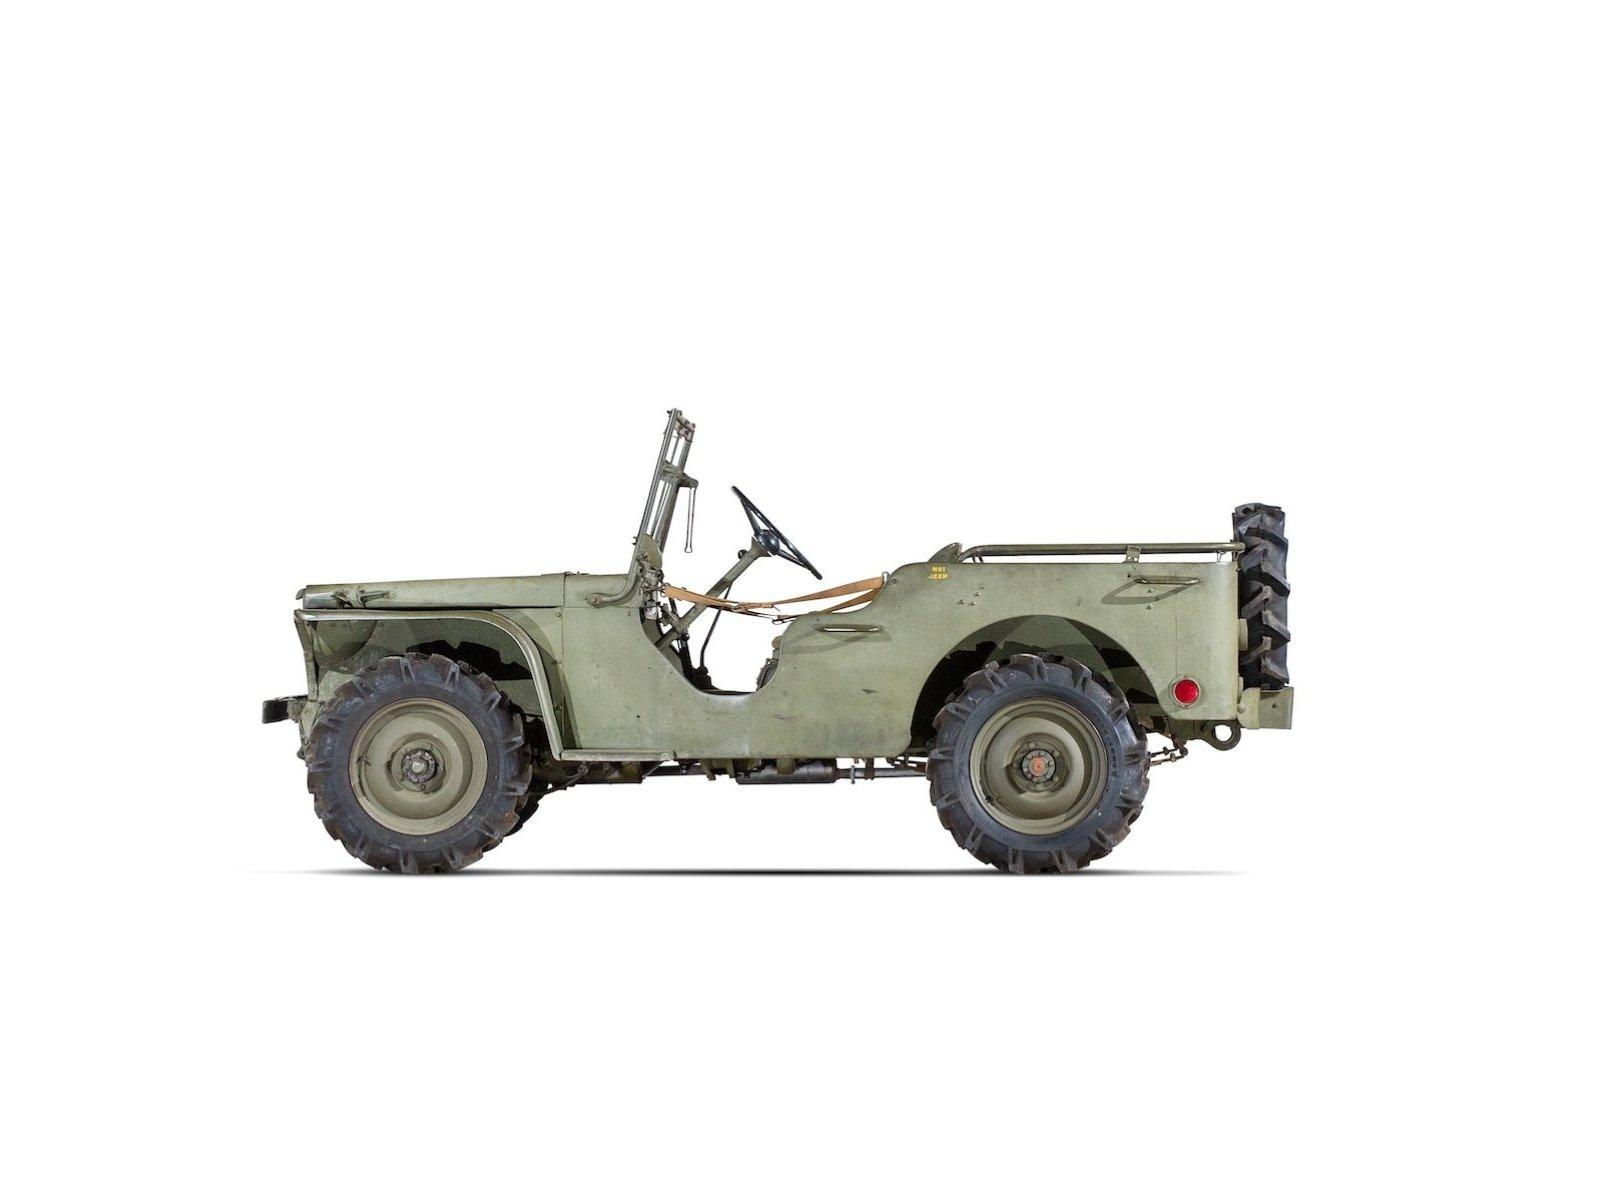 Image of 1940 Ford Pilot Model "Jeep"